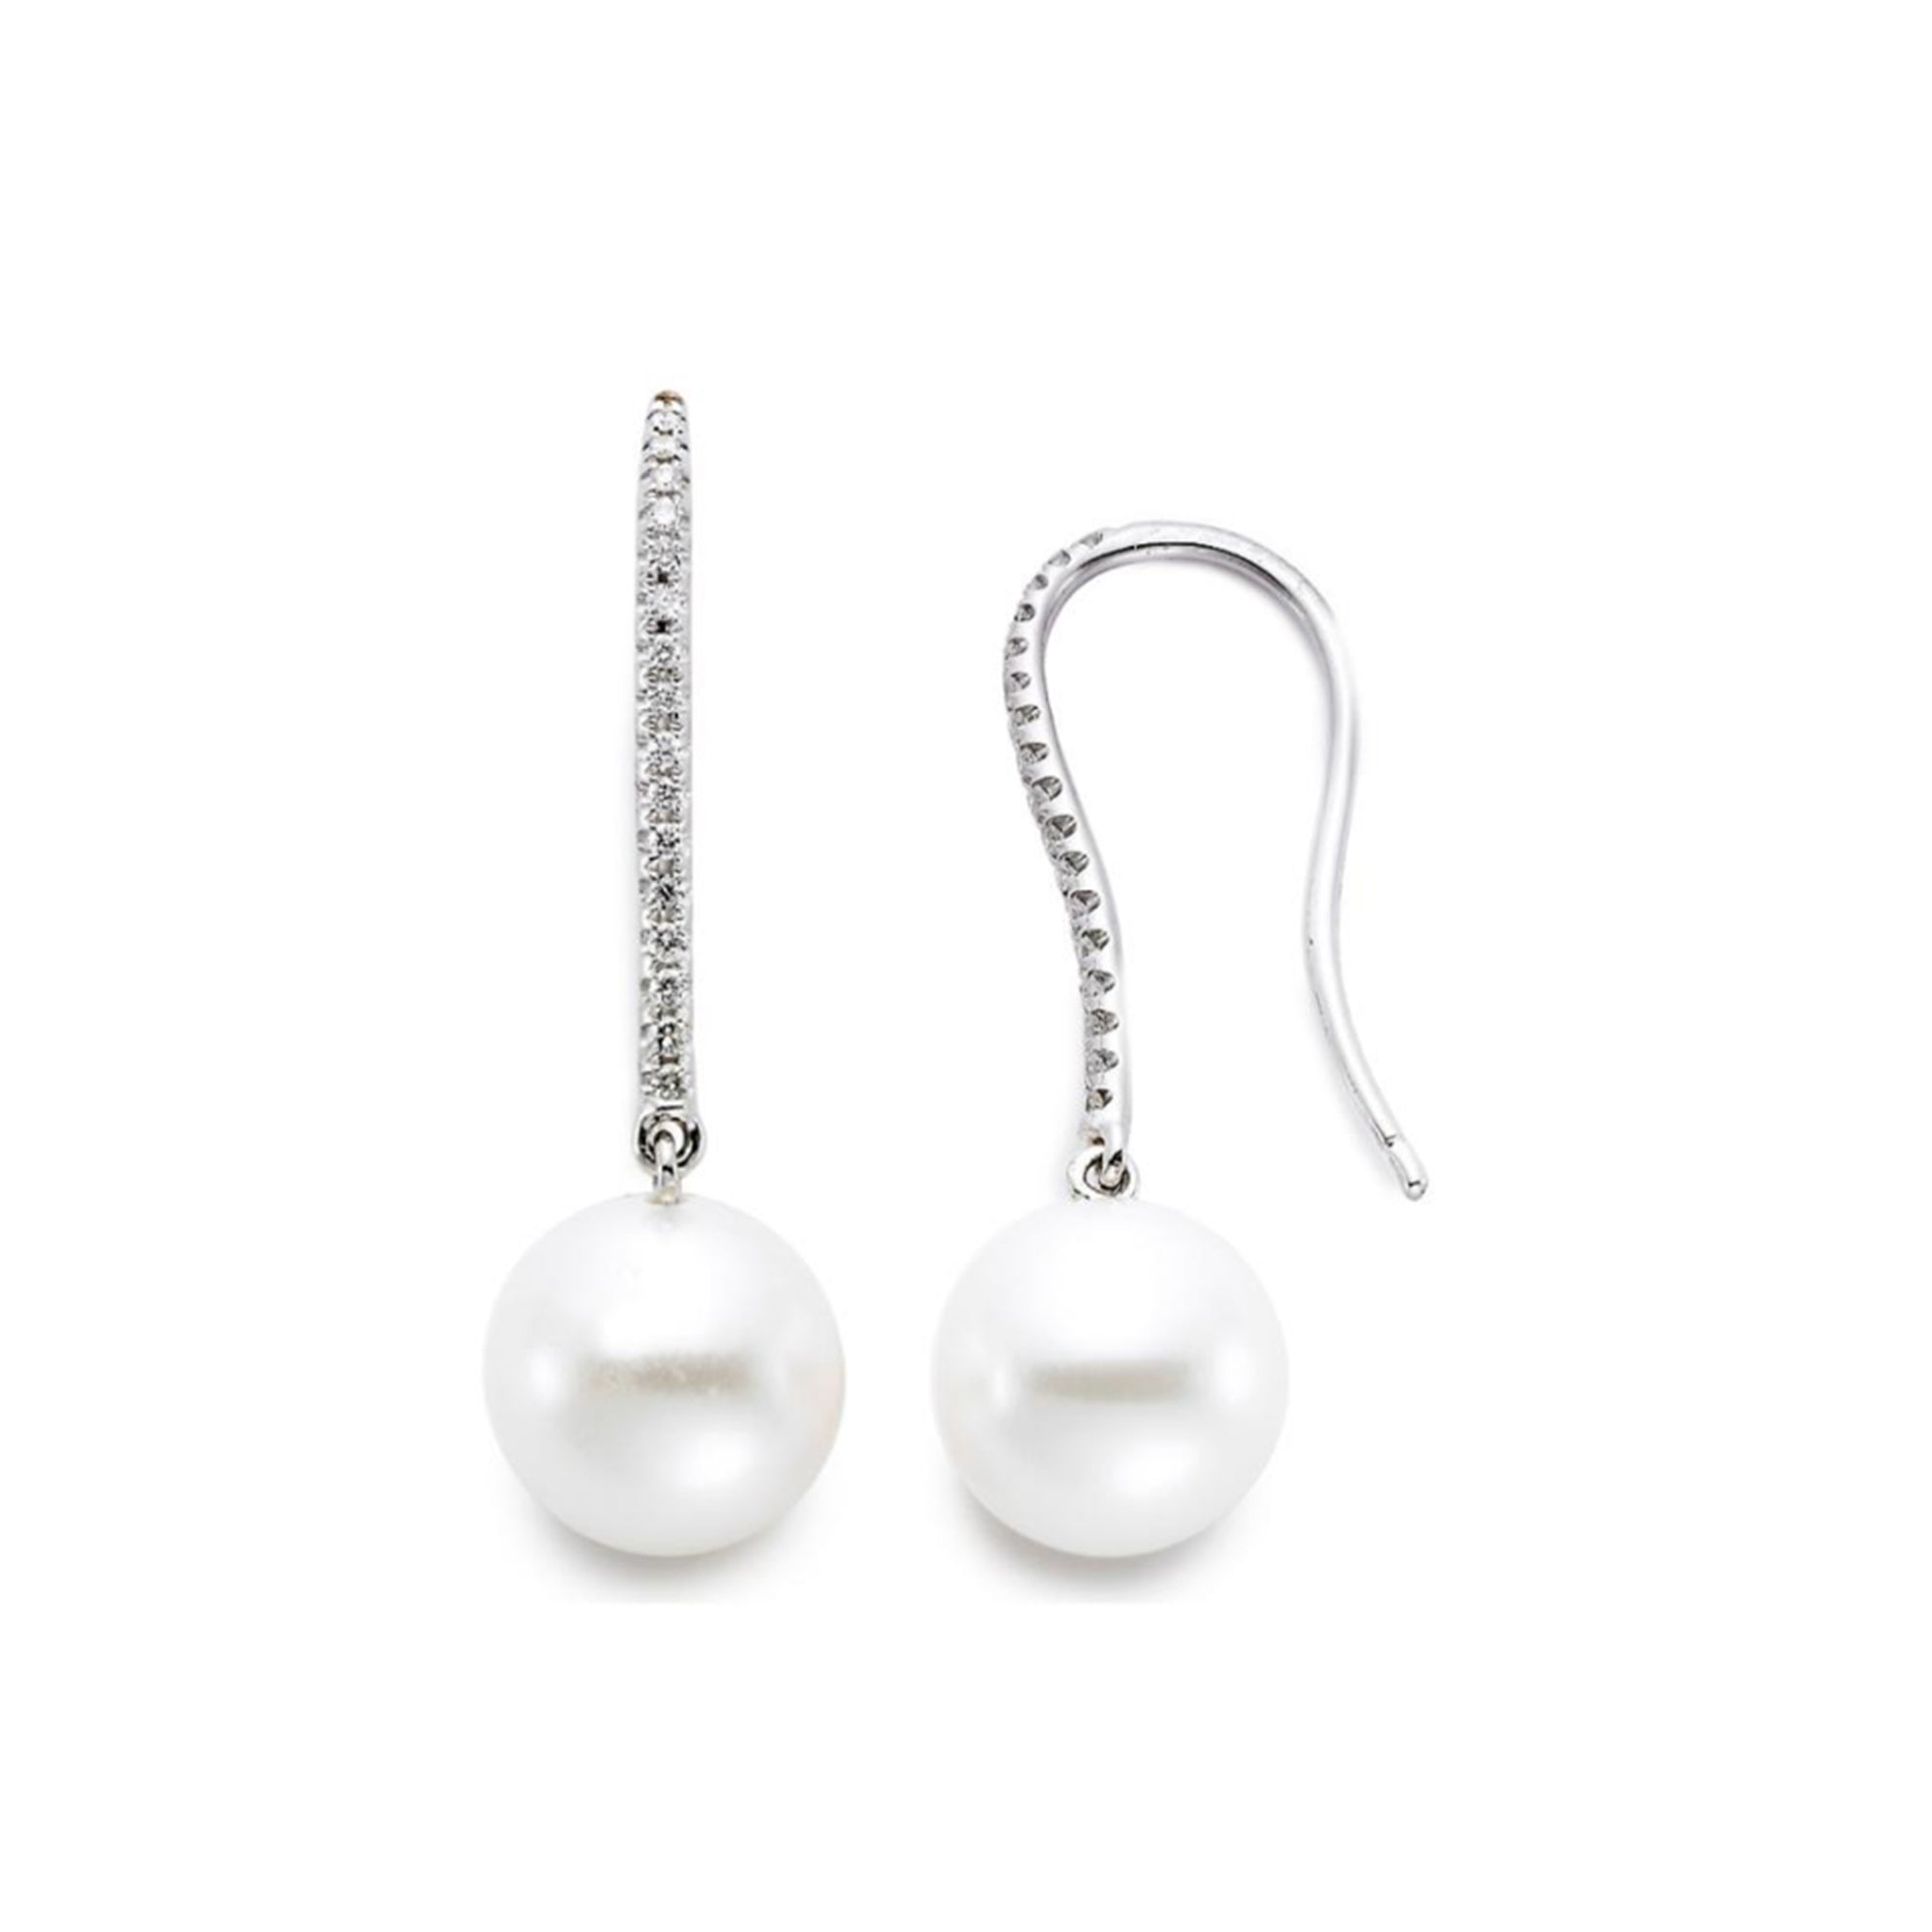 South Sea Pearl and Diamond Earrings by Mastoloni - Talisman Collection Fine Jewelers